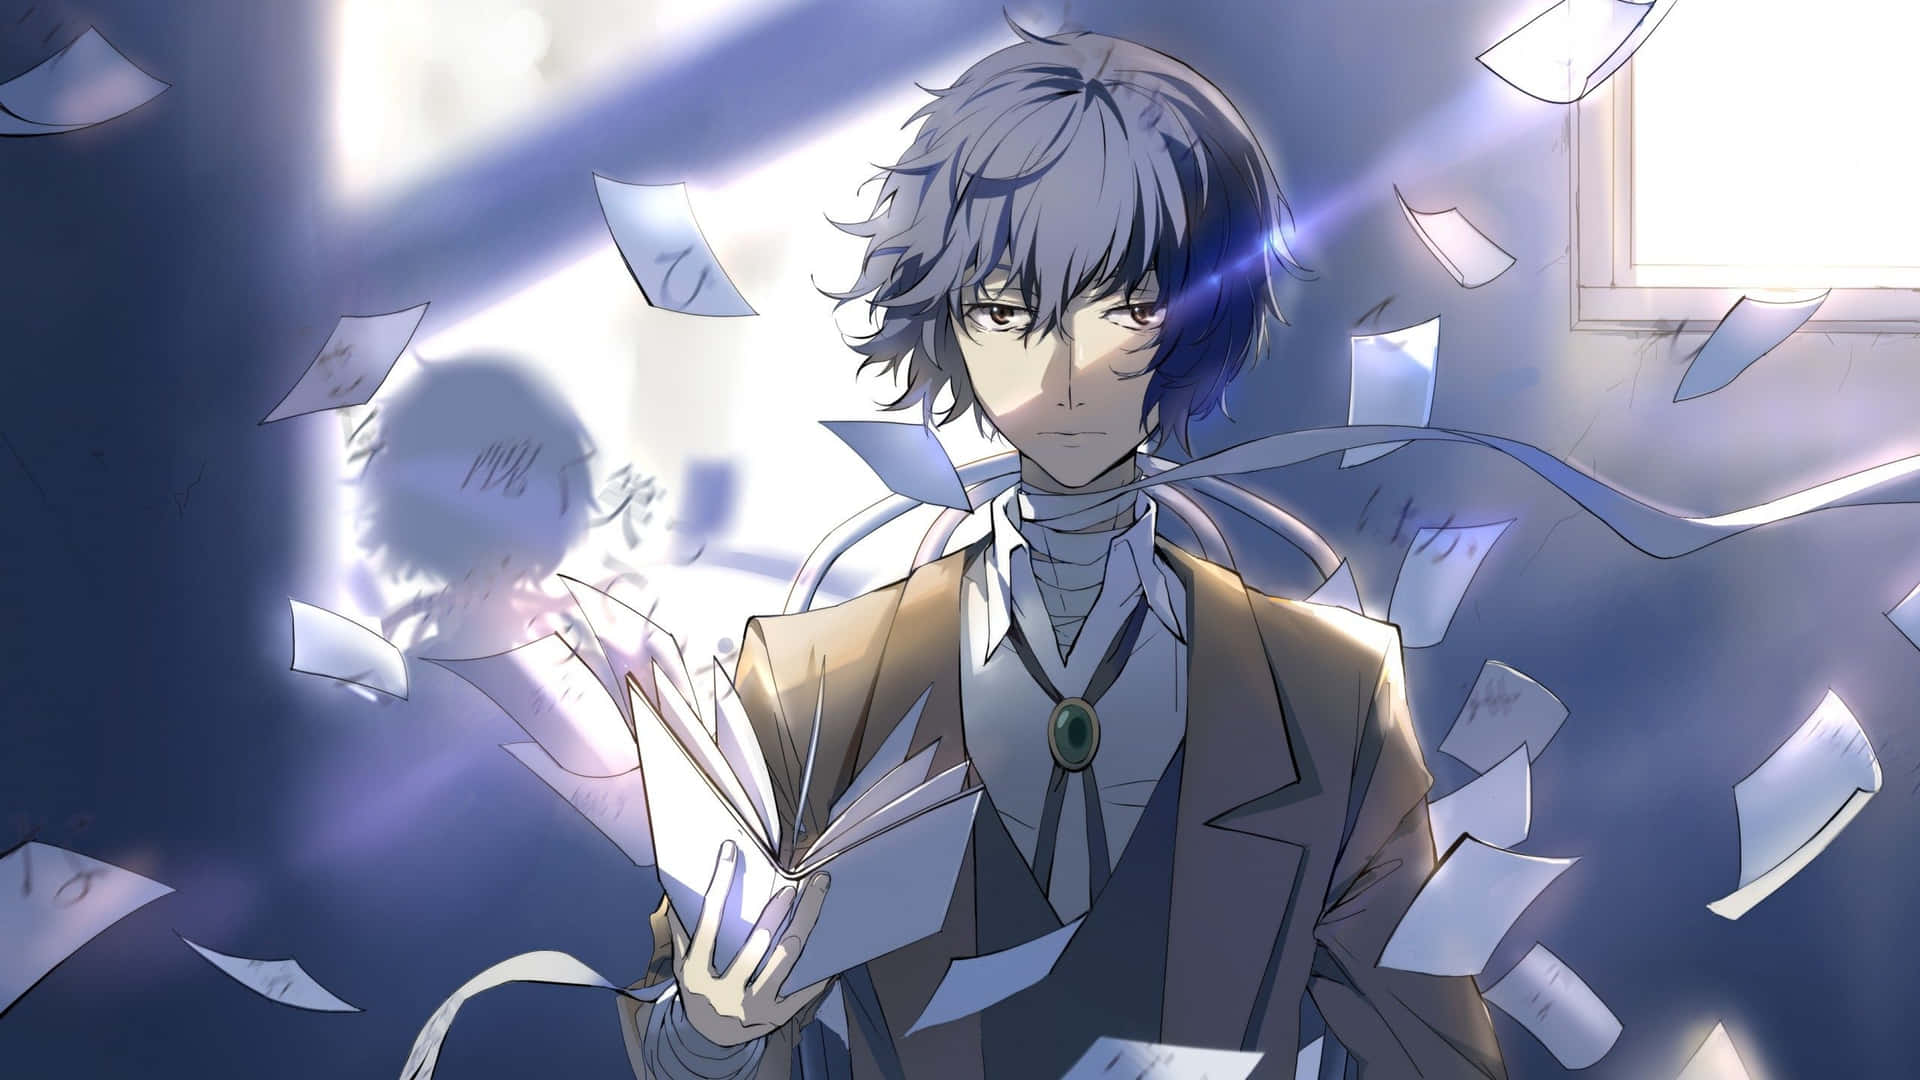 Bungo Stray Dogs Revealed: The Fascinating Truth Behind Dazai's 'No Longer Human' Power